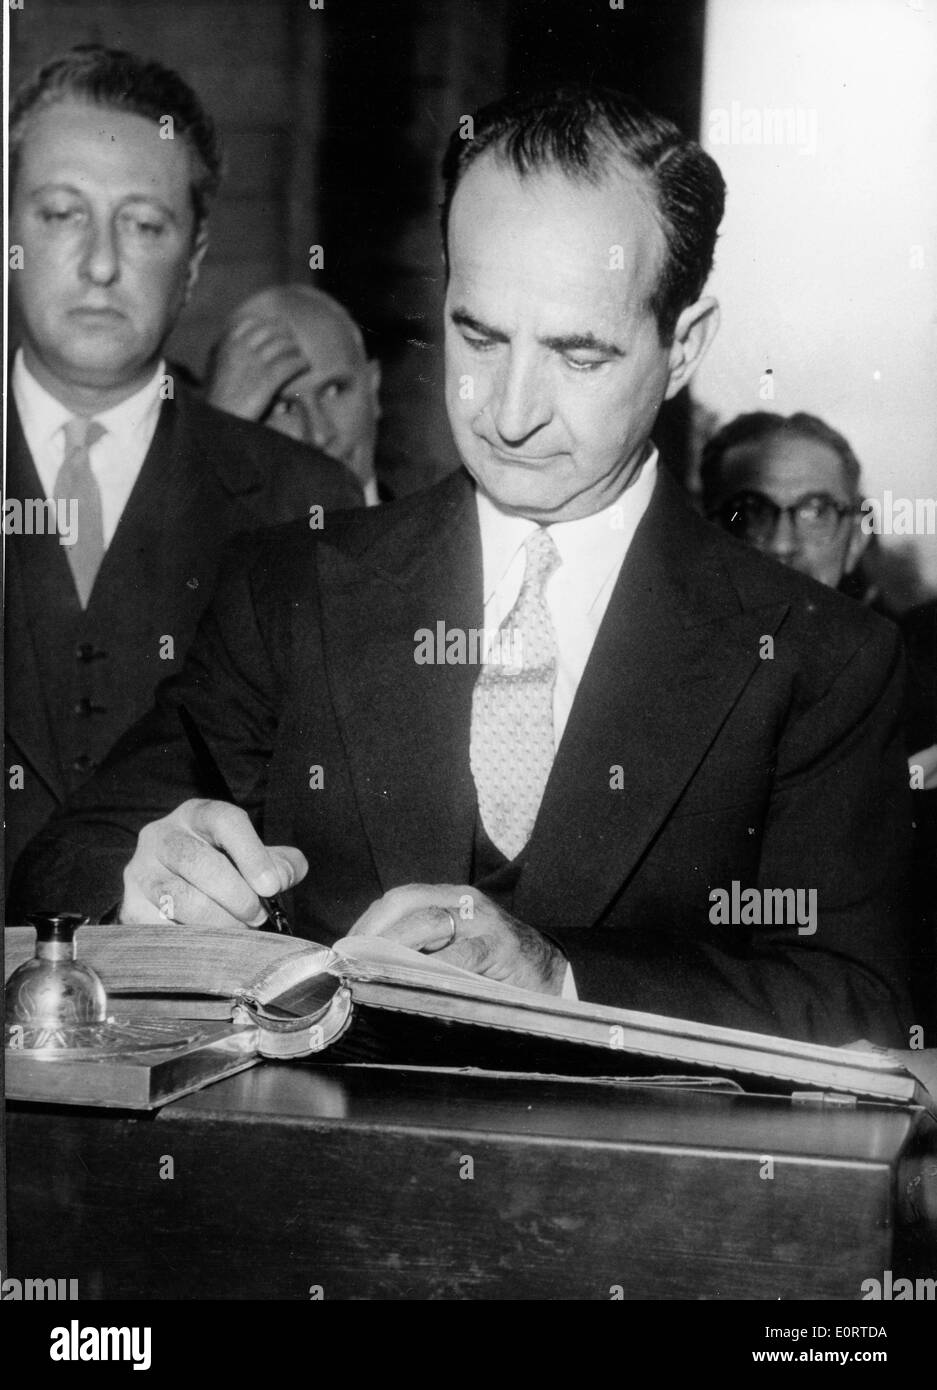 Jose Figueres Ferrer signing a book Stock Photo